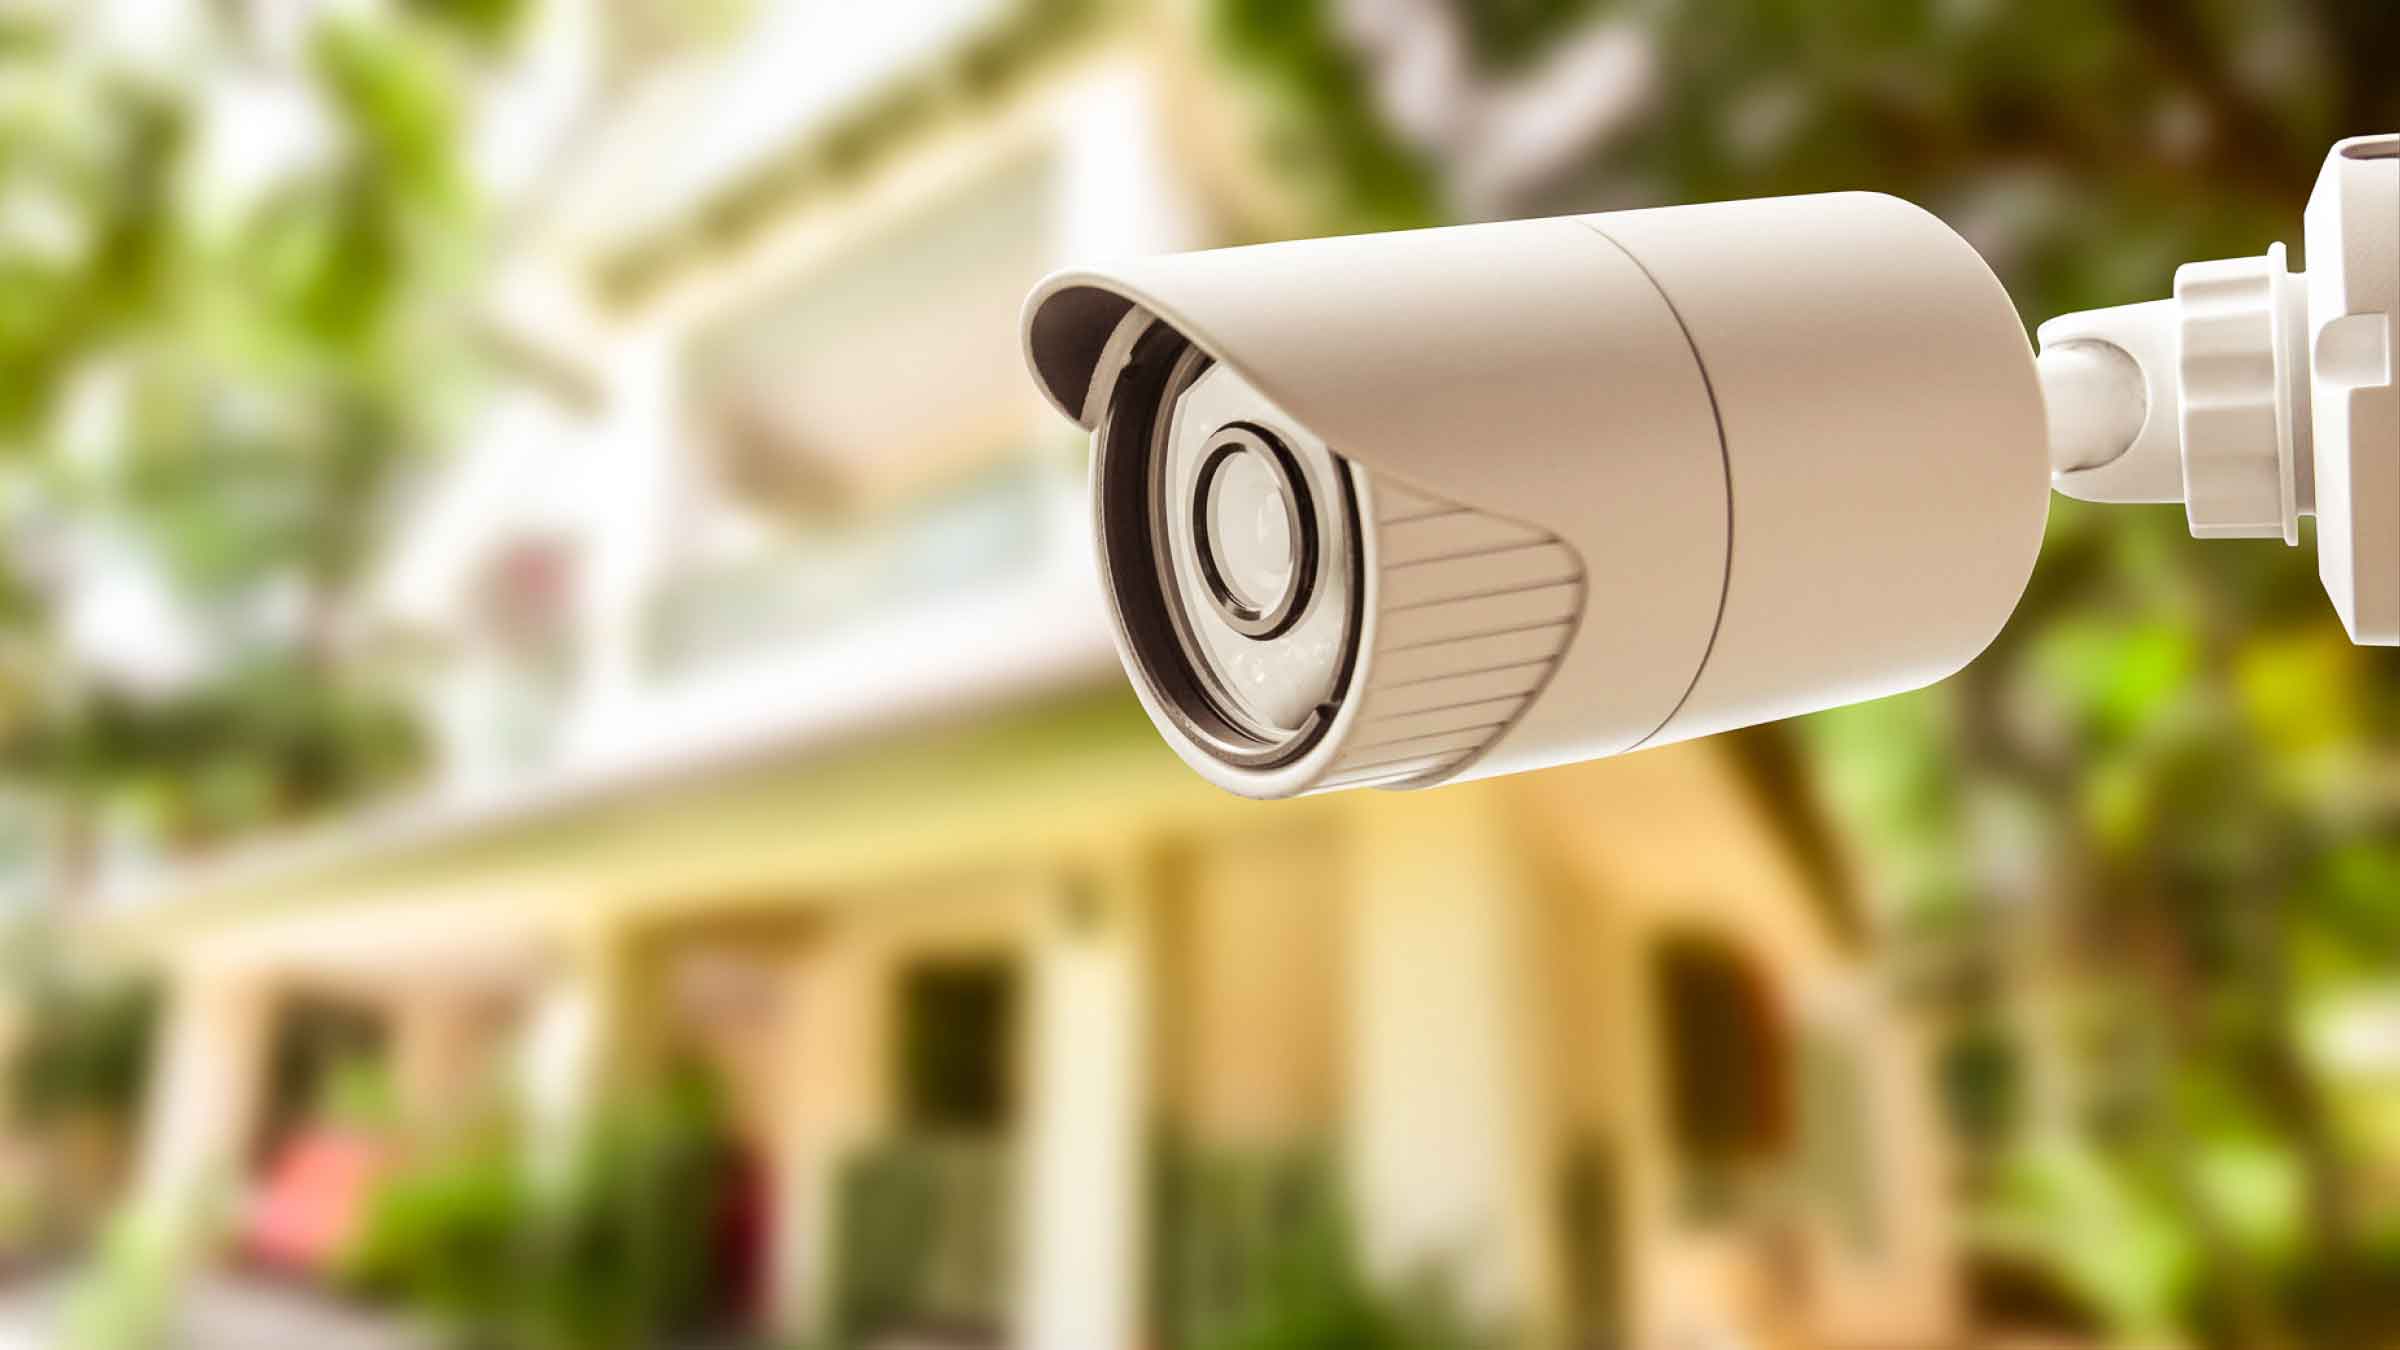 Surveillance camera pointed outward, with blurred home in the background surrounded by greenery.